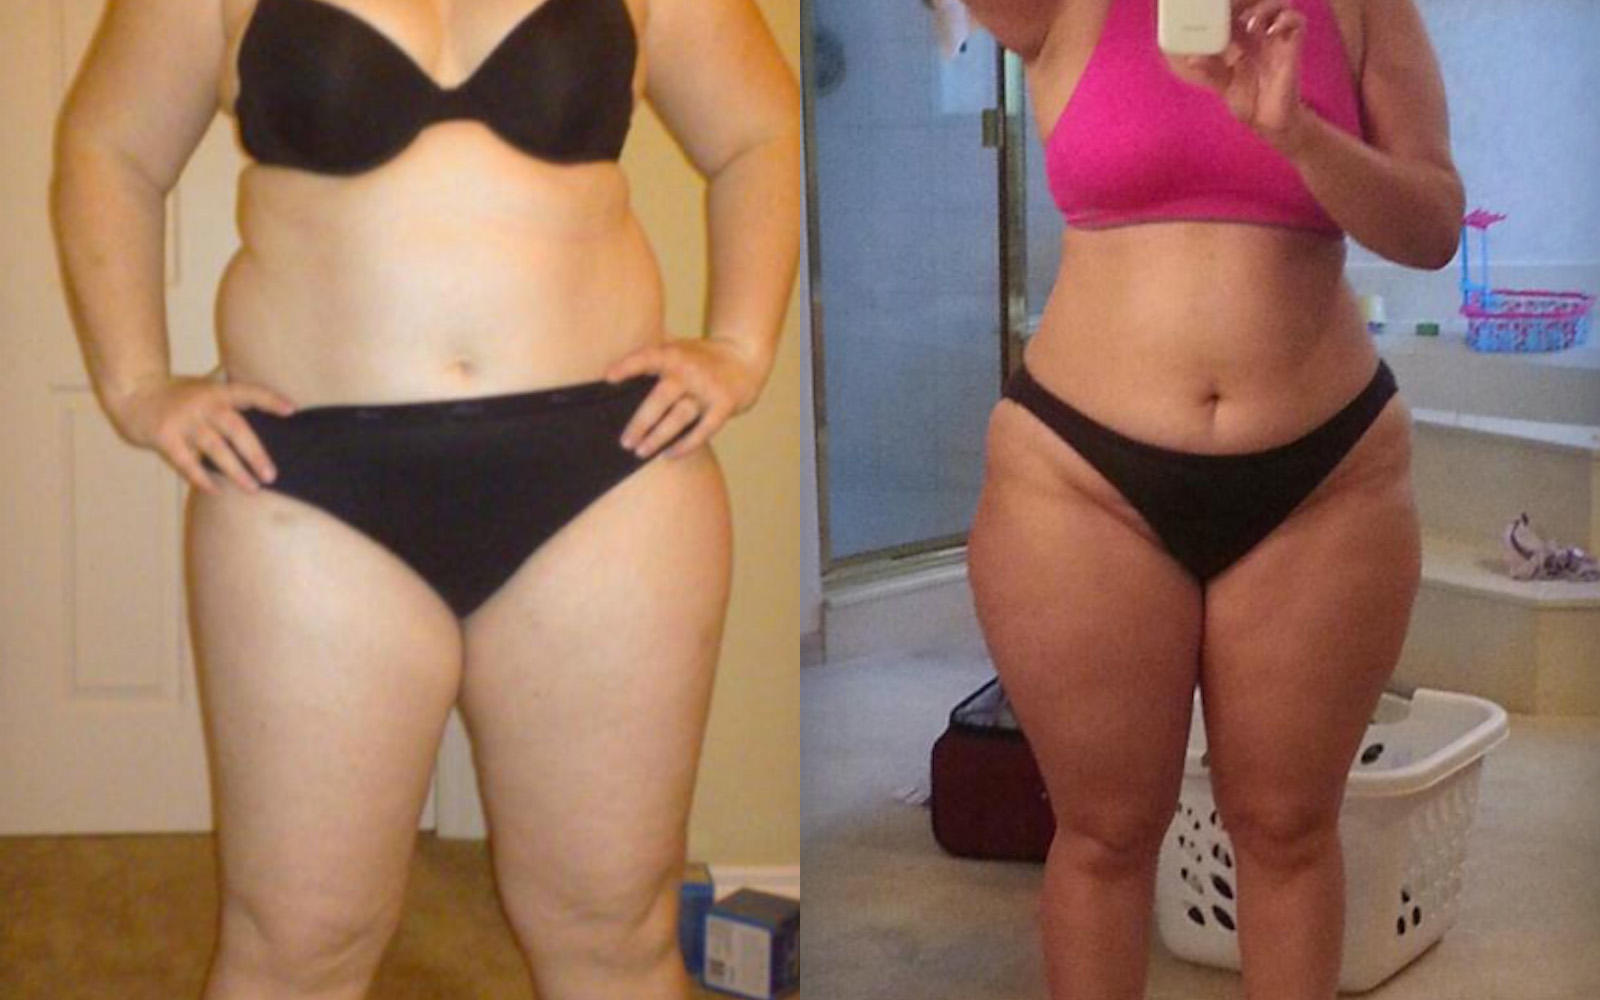 14 Photos That Show Women Can Look Different at the Same Weight